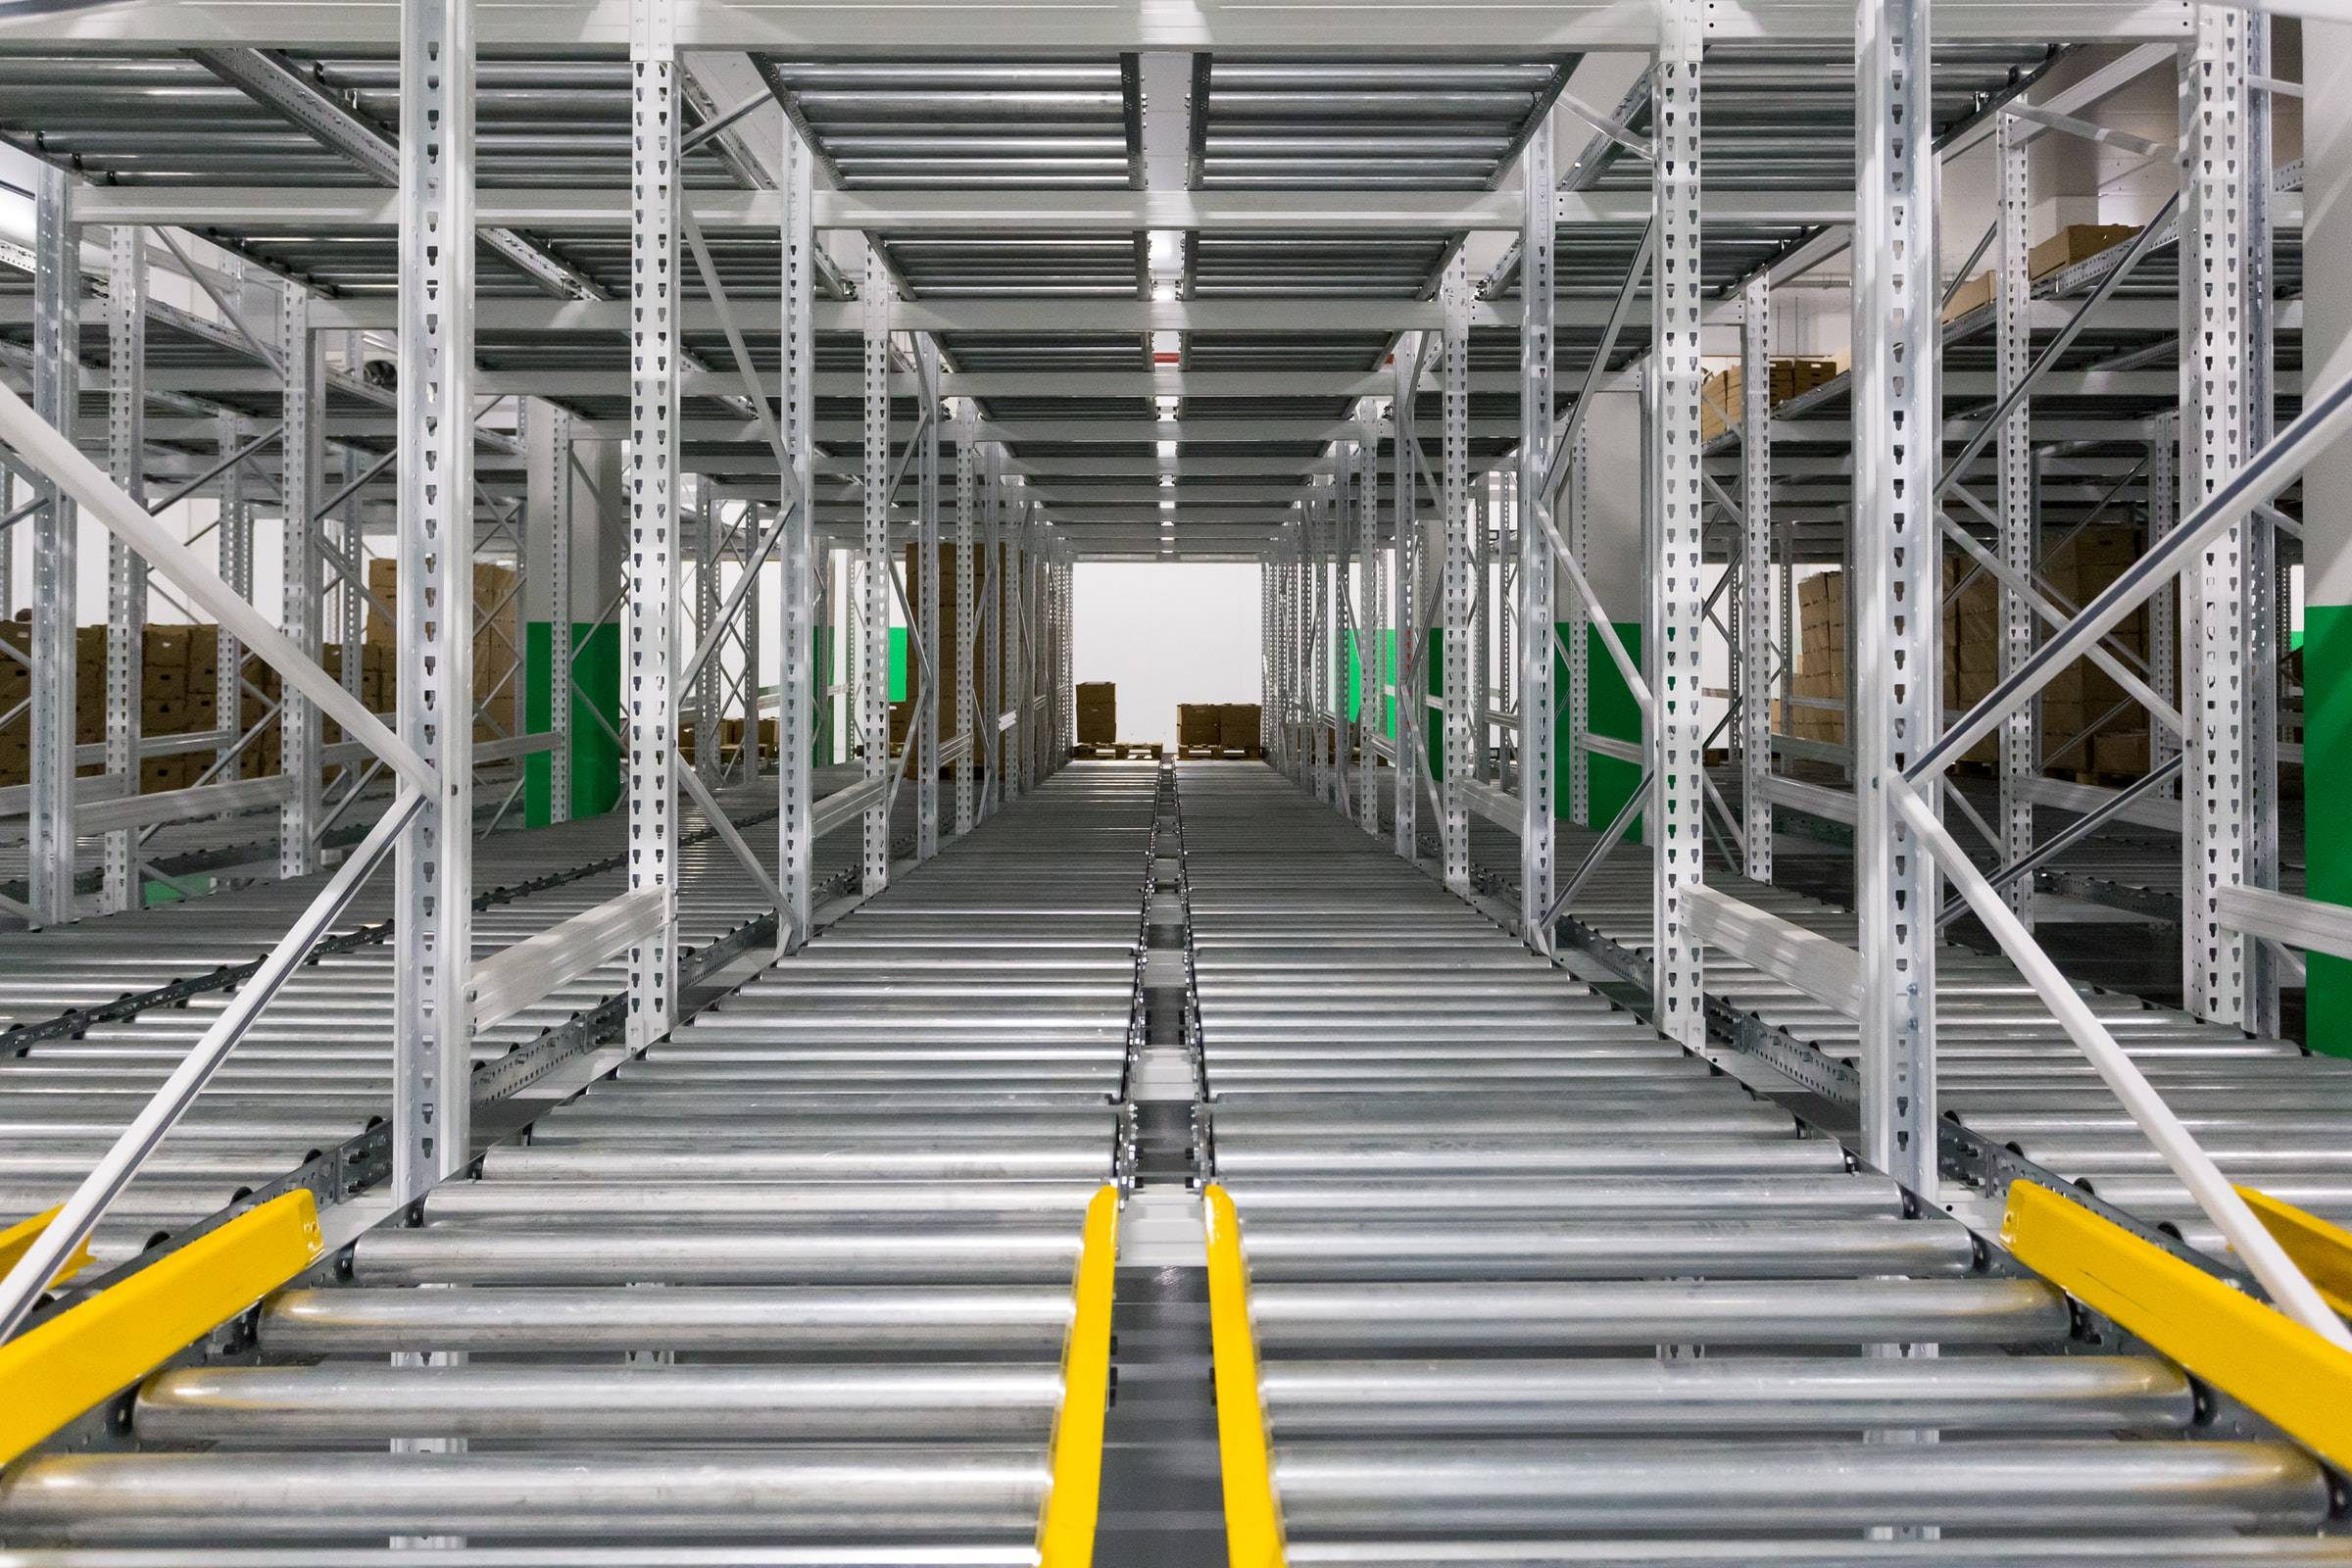 The sustainable and smarter future of warehousing: Automation, Robotics and Energy Efficiency